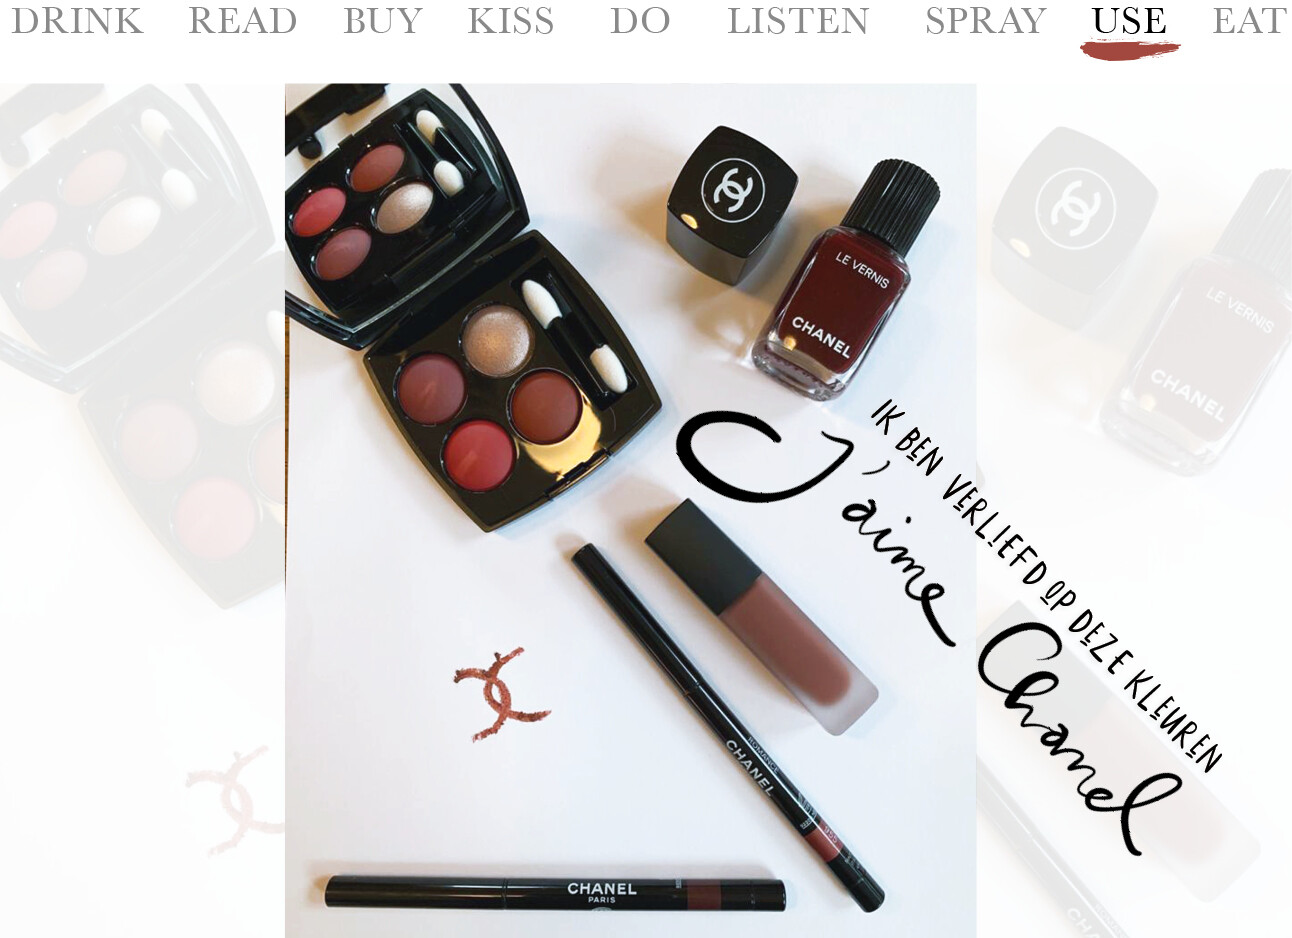 Today we…use CHANEL make-up